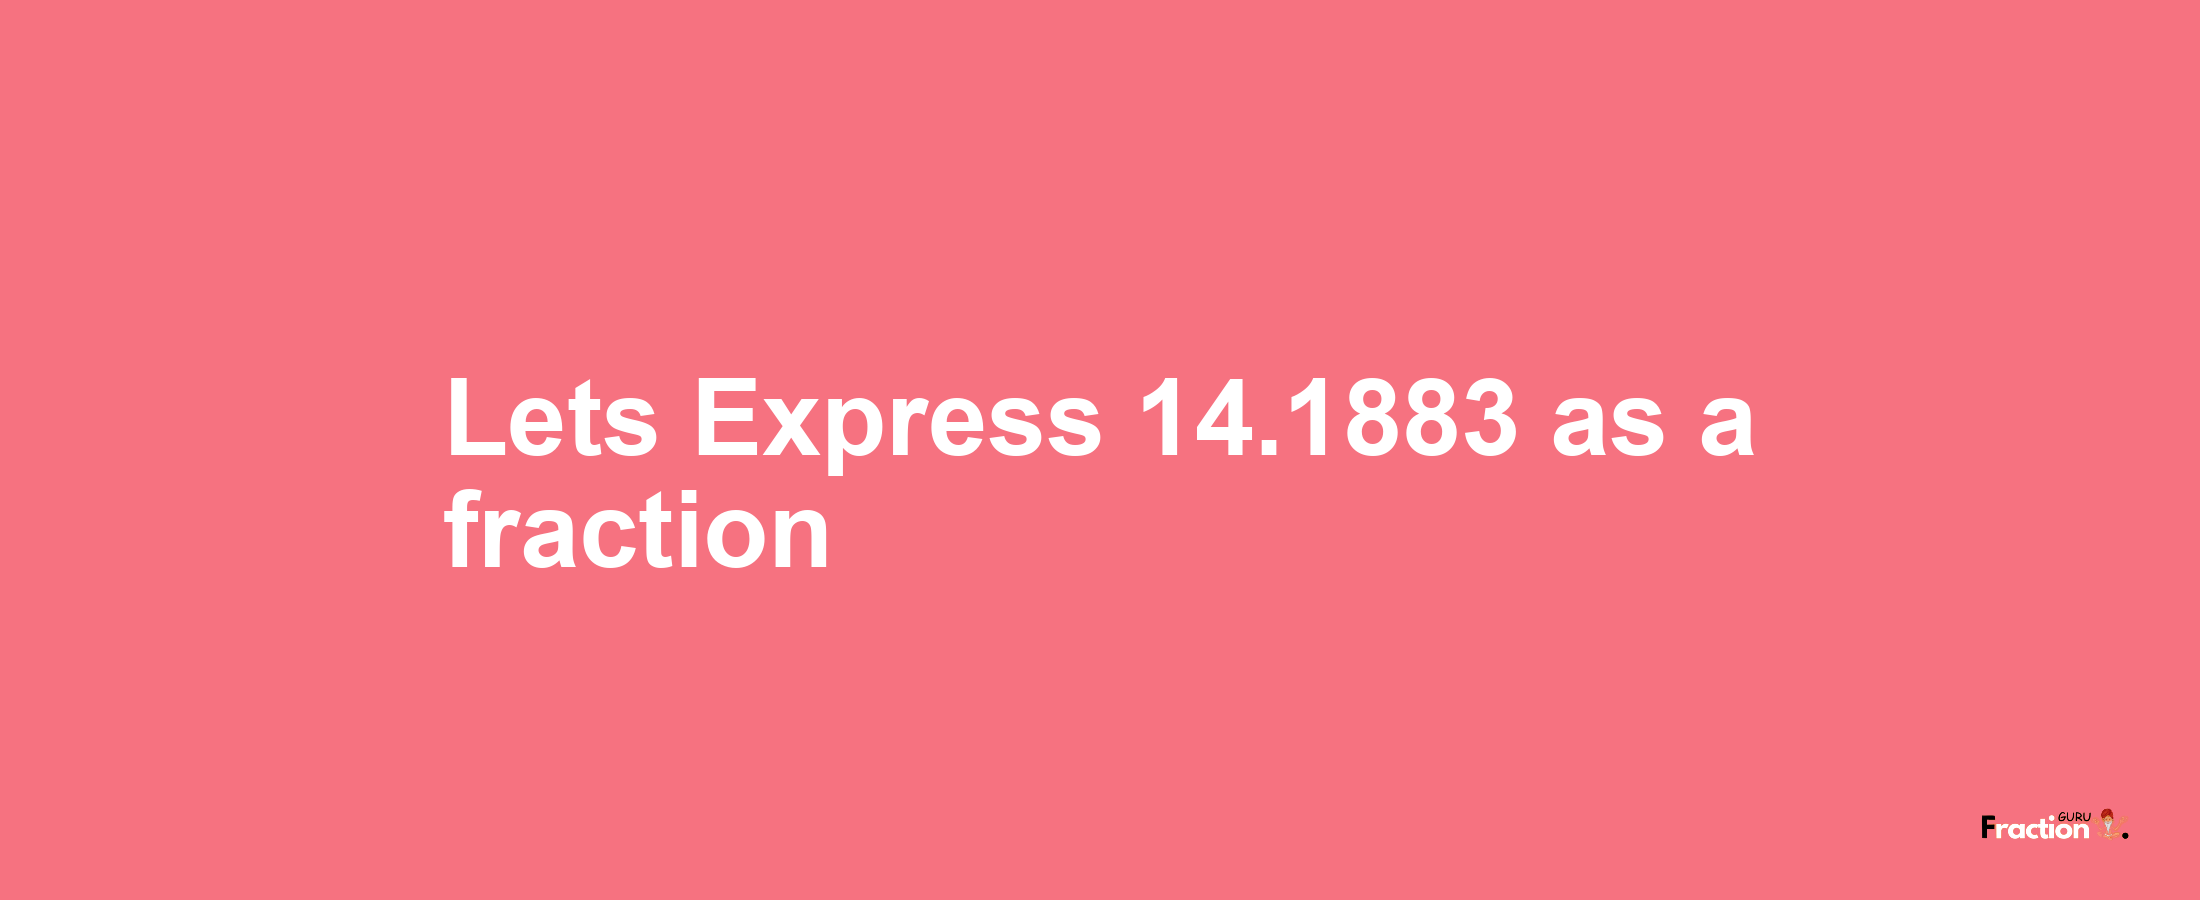 Lets Express 14.1883 as afraction